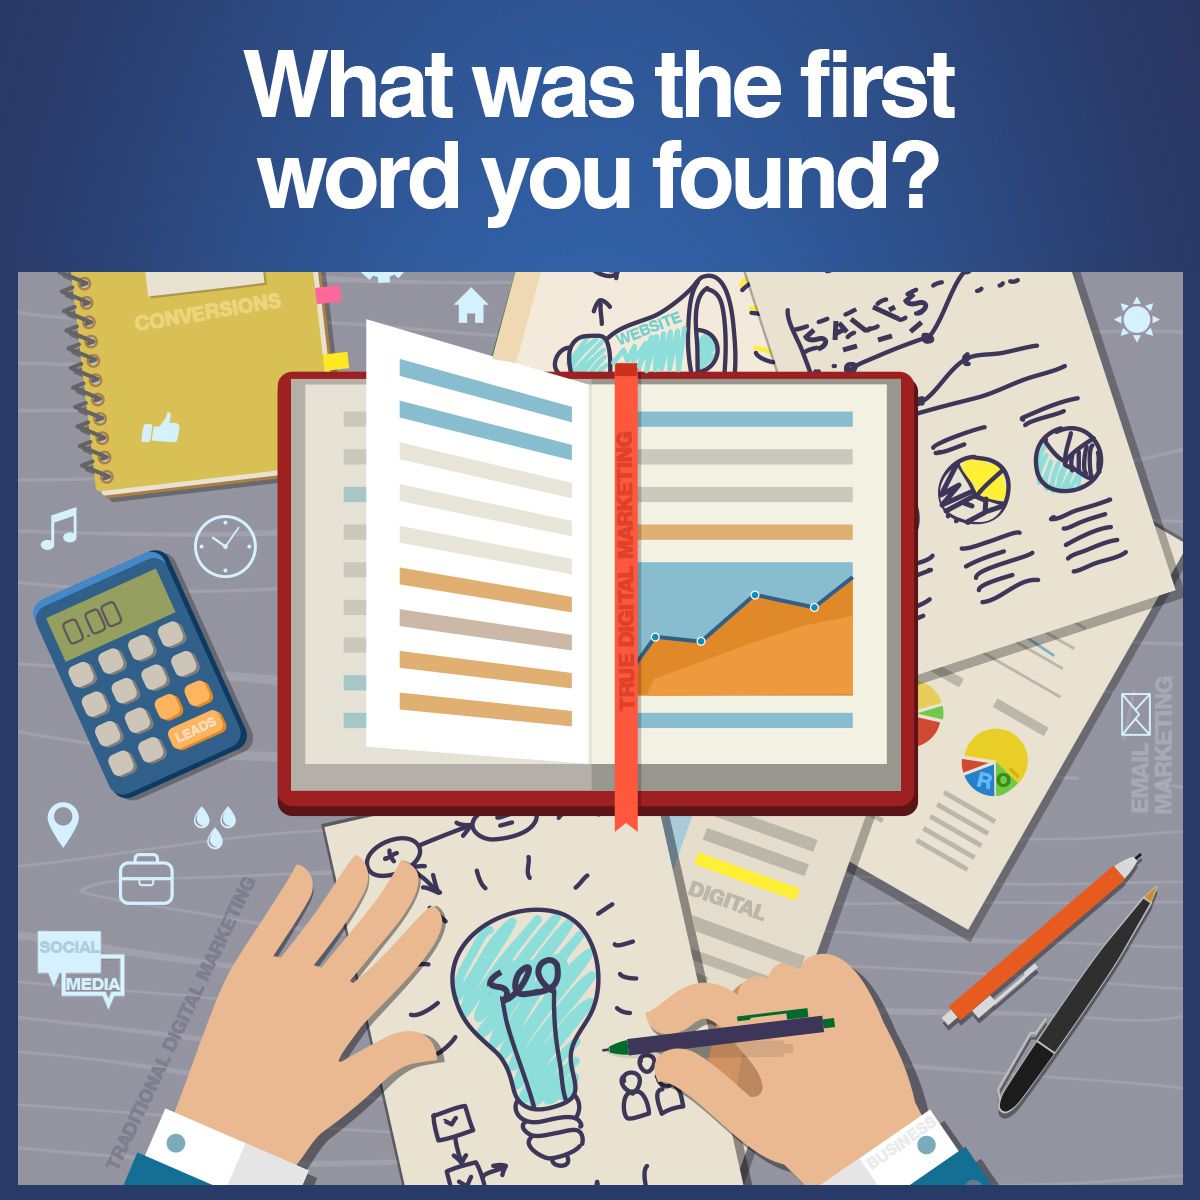 Which was the first word you found?